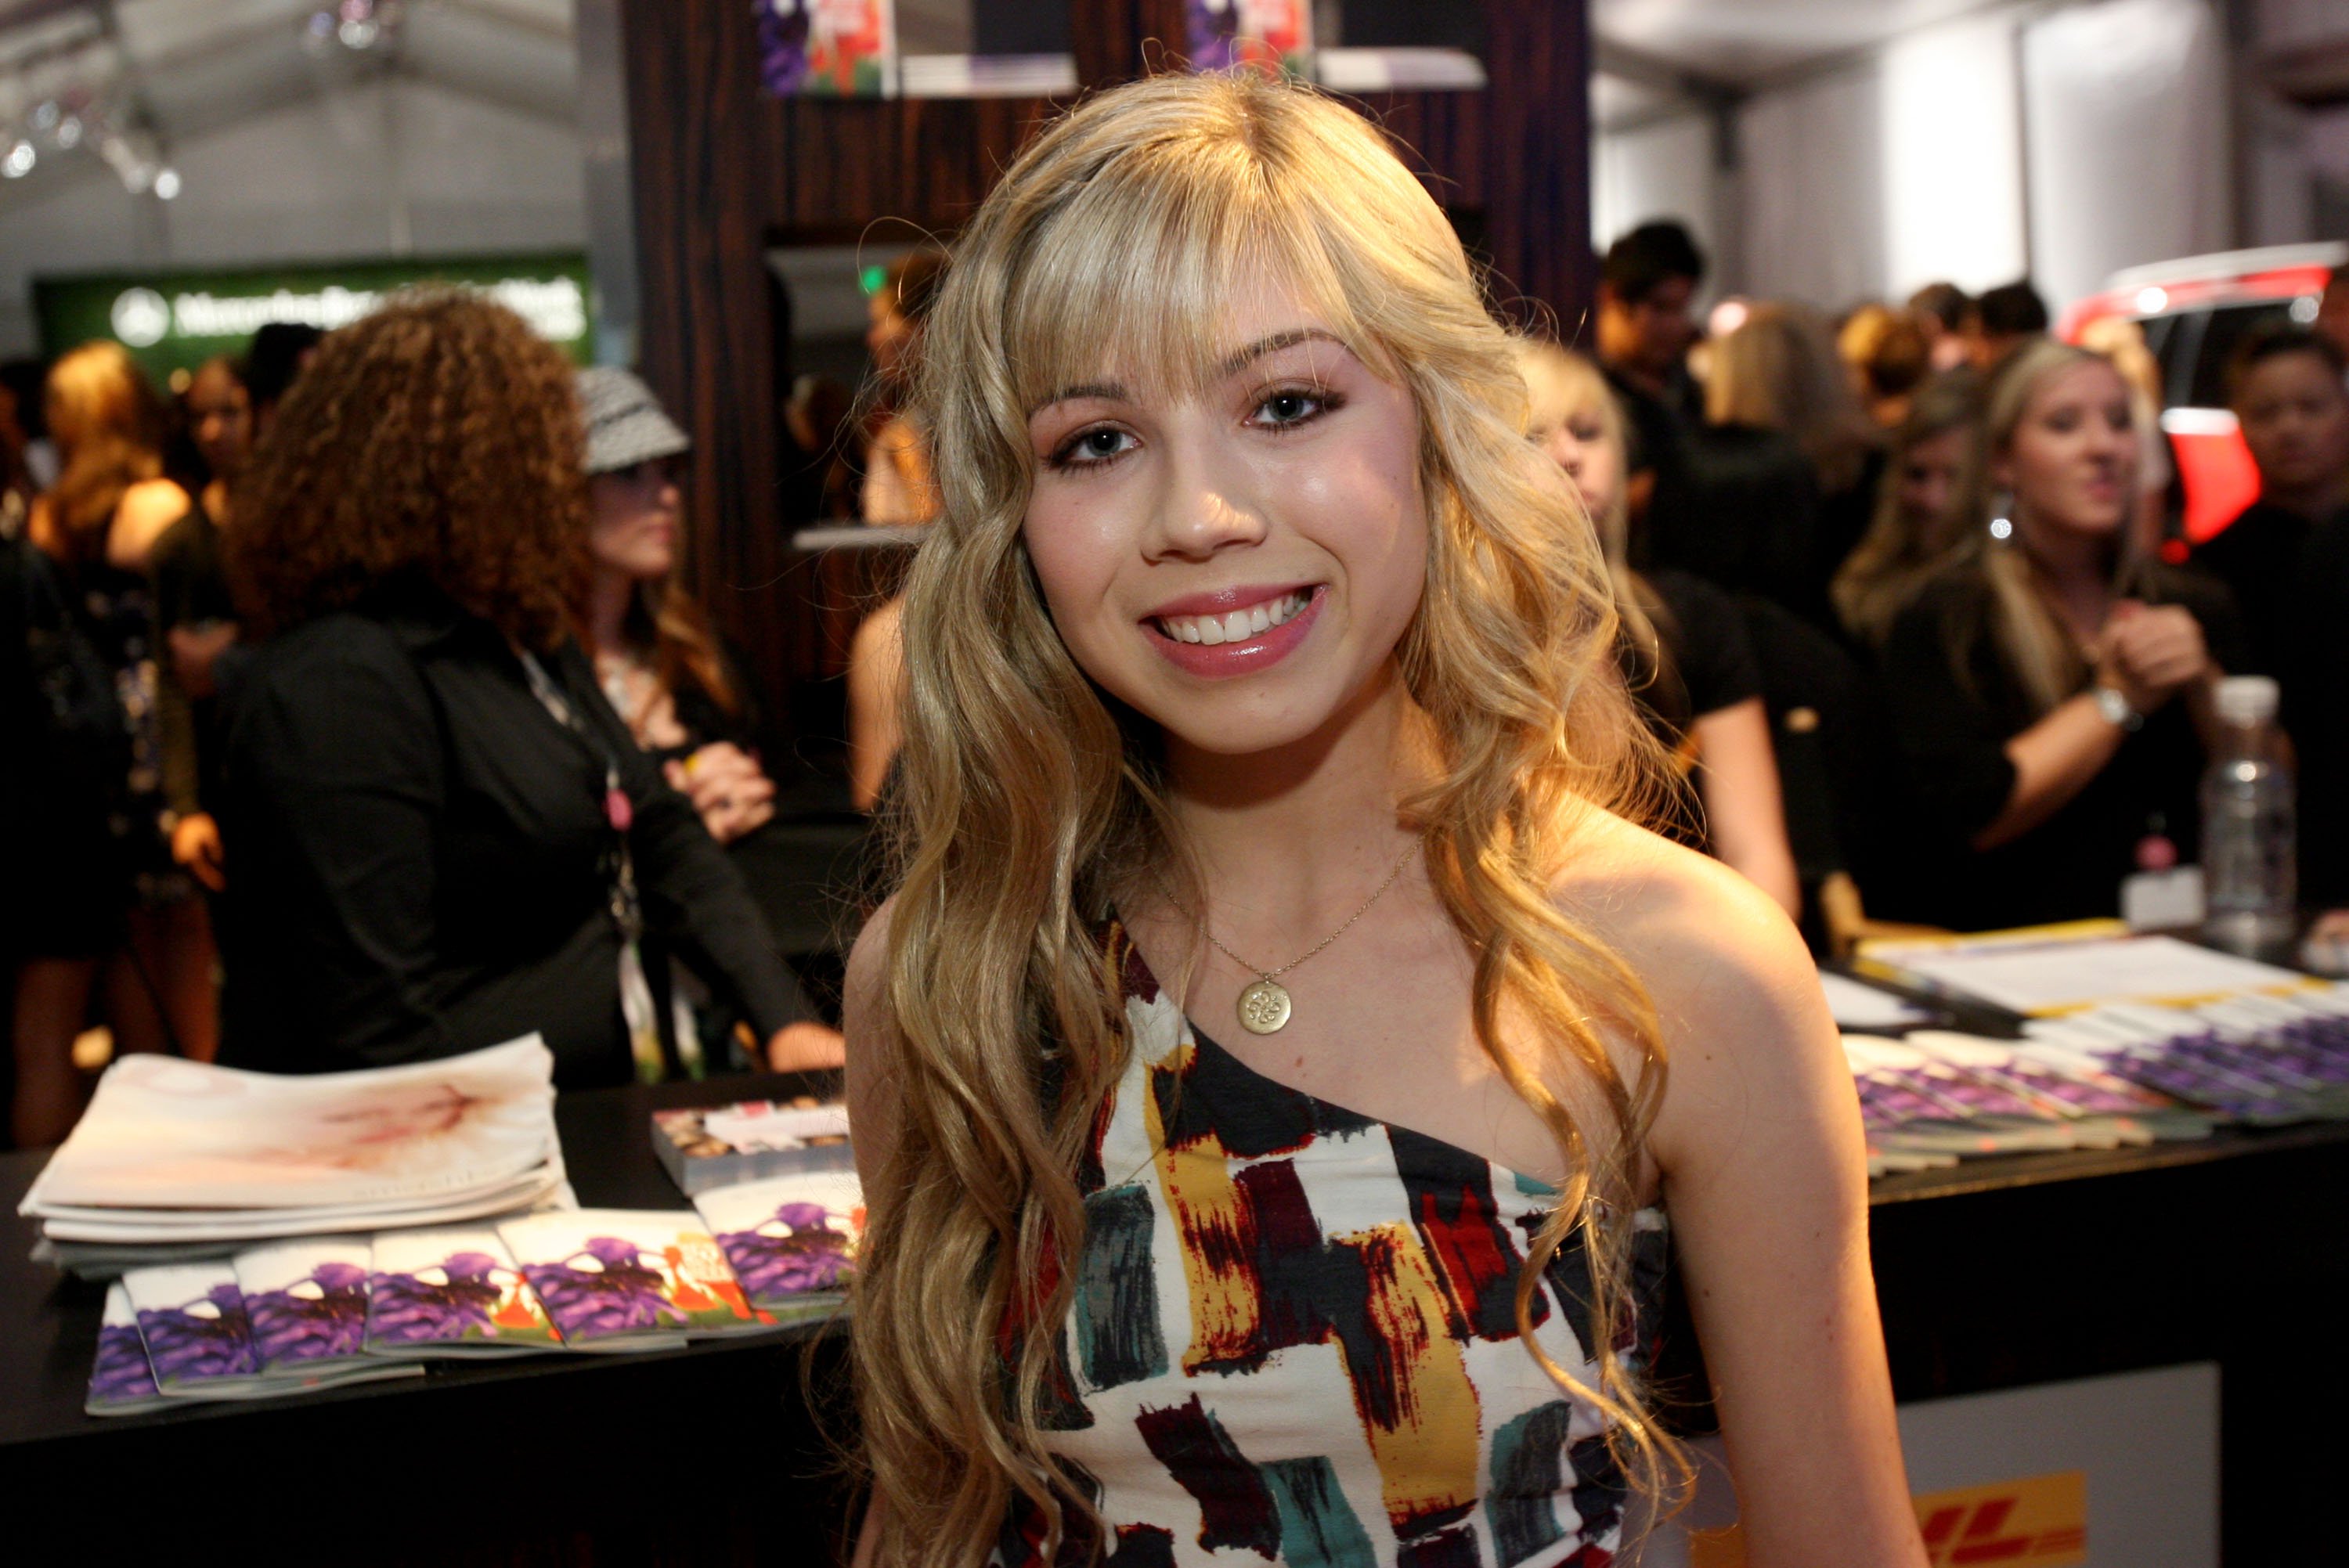 Actor Jennette McCurdy attends the Spring 2009 Mercedes-Benz Fashion Week